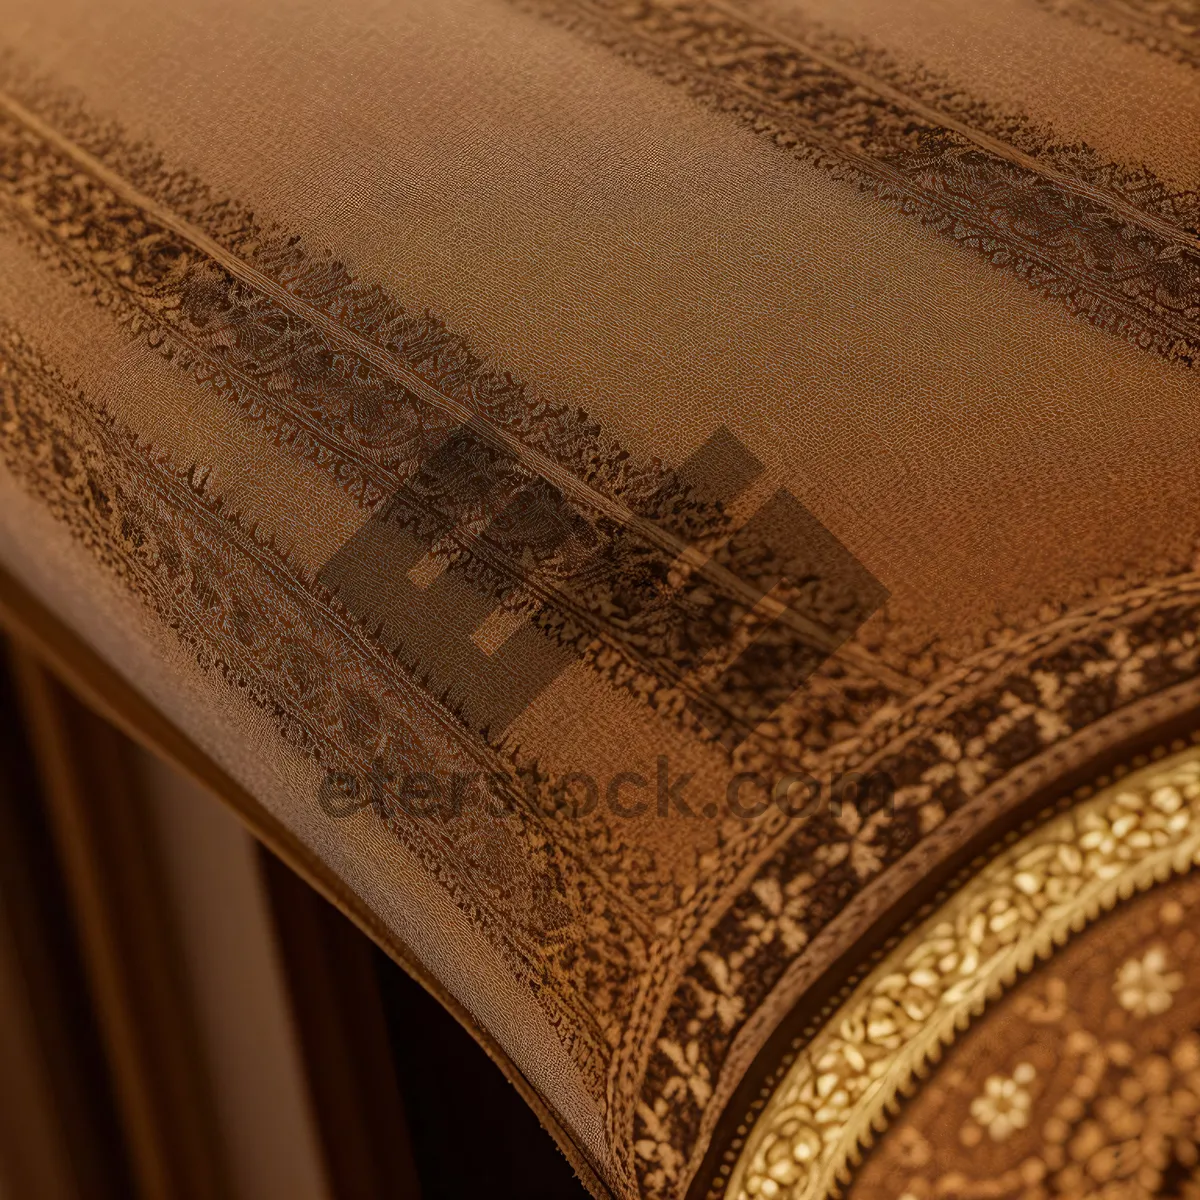 Picture of Exquisite Arabesque Stucco Upholstery: Intricate Pattern, Delicate Lace, and Textured Art